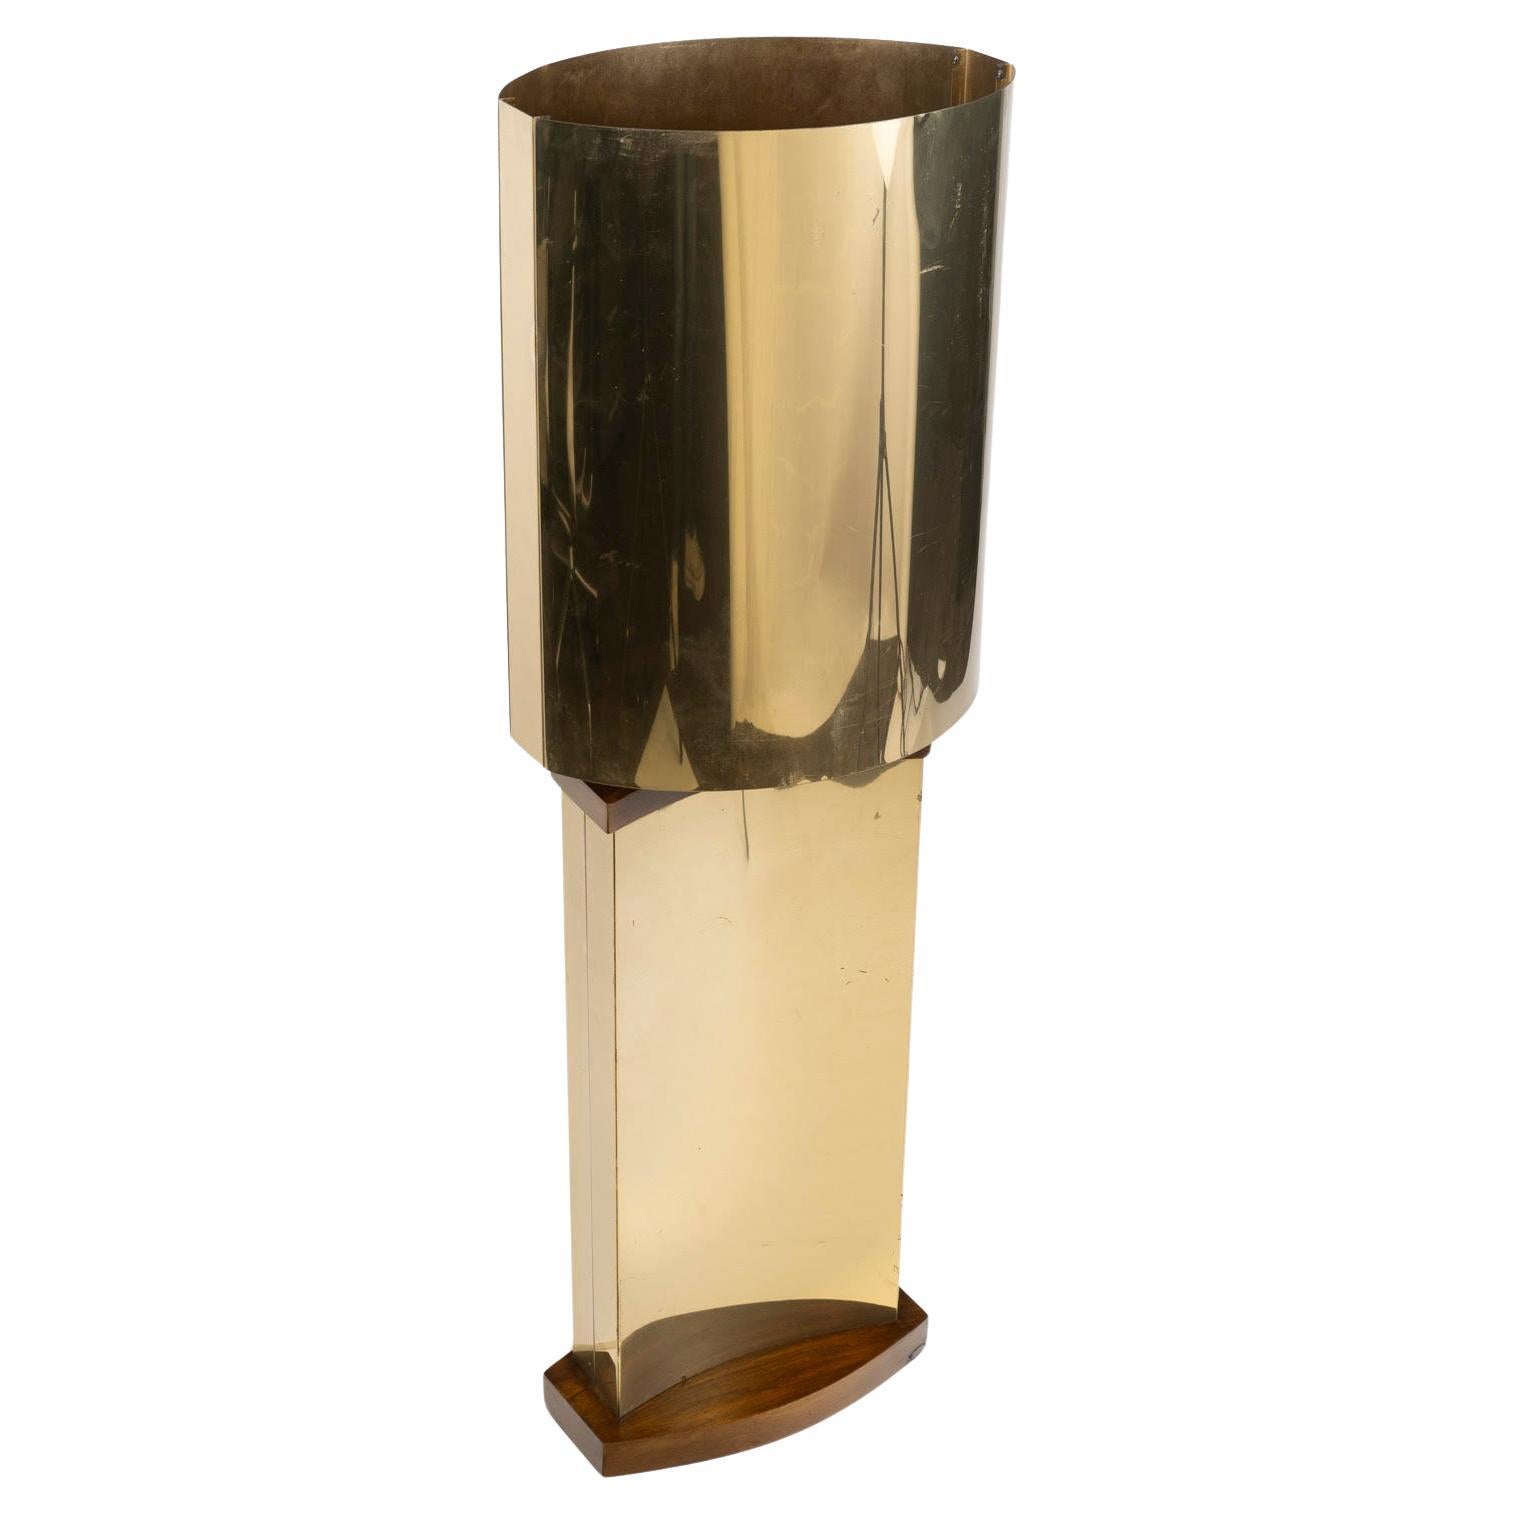 Brass and Wood Table Lamp from the 1970s.